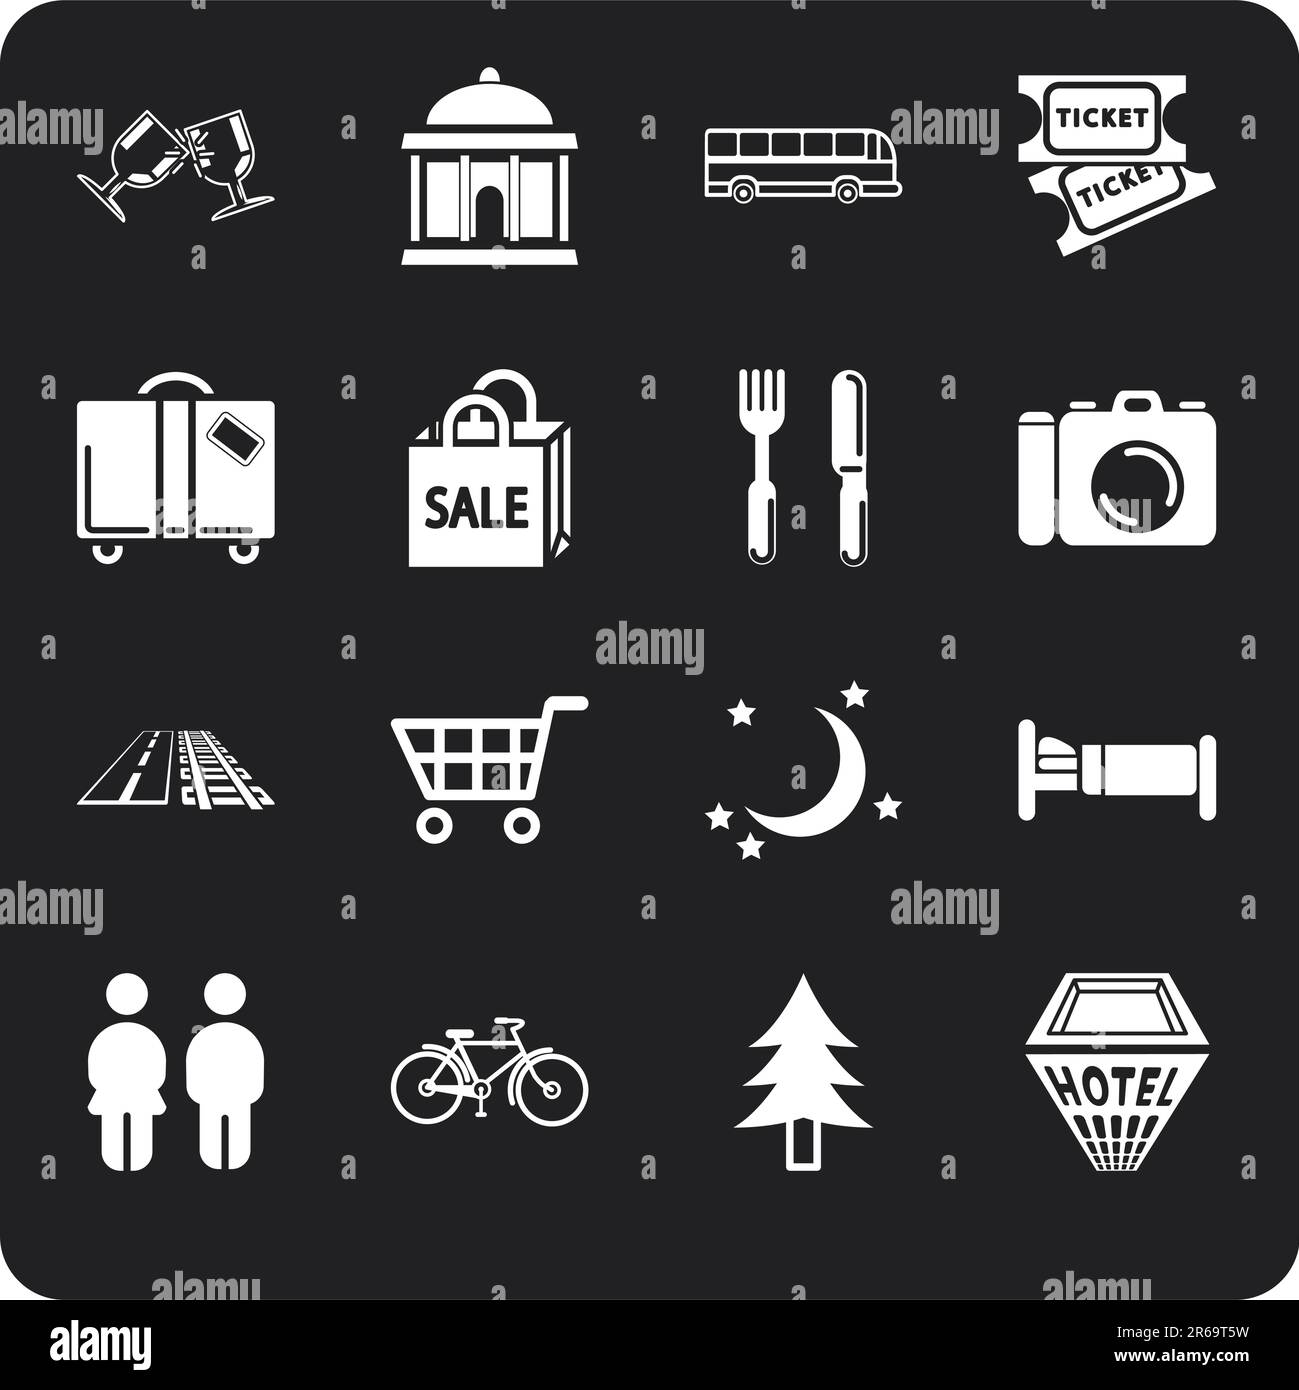 Icon set relating to city or location information for tourist web sites or maps etc. Includes icons for Restaurants, Lodging, Attractions, Shopping... Stock Vector